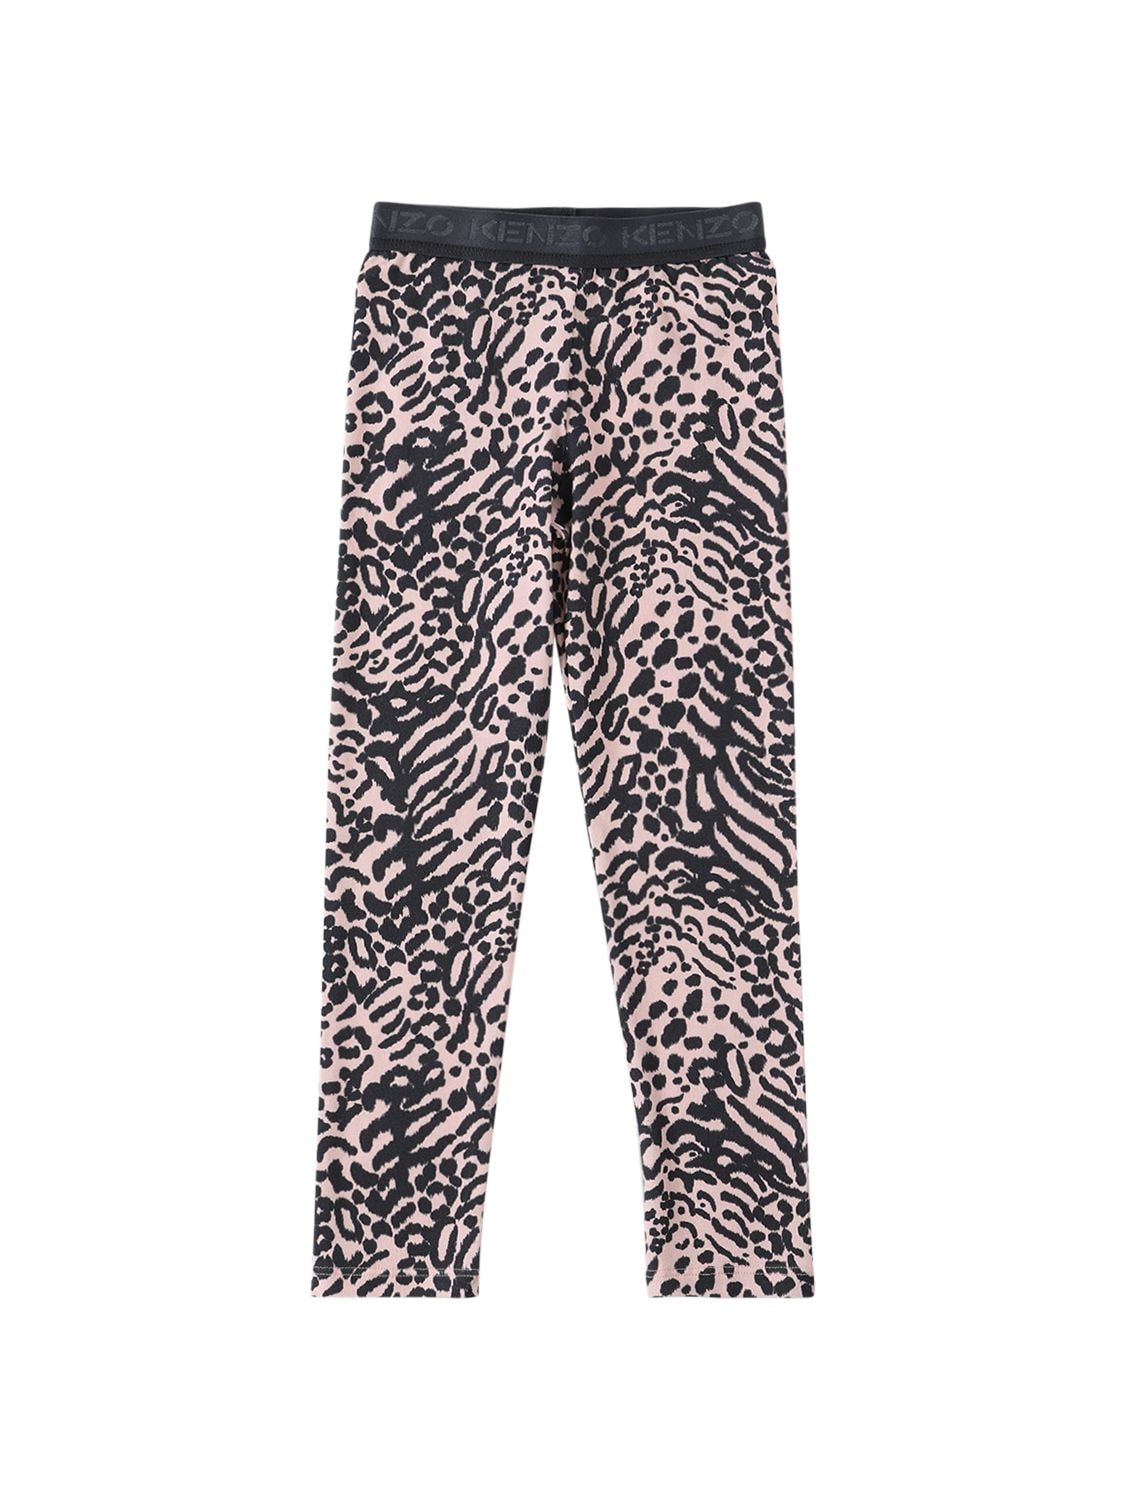 KENZO ALL OVER PRINT COTTON JERSEY LEGGINGS